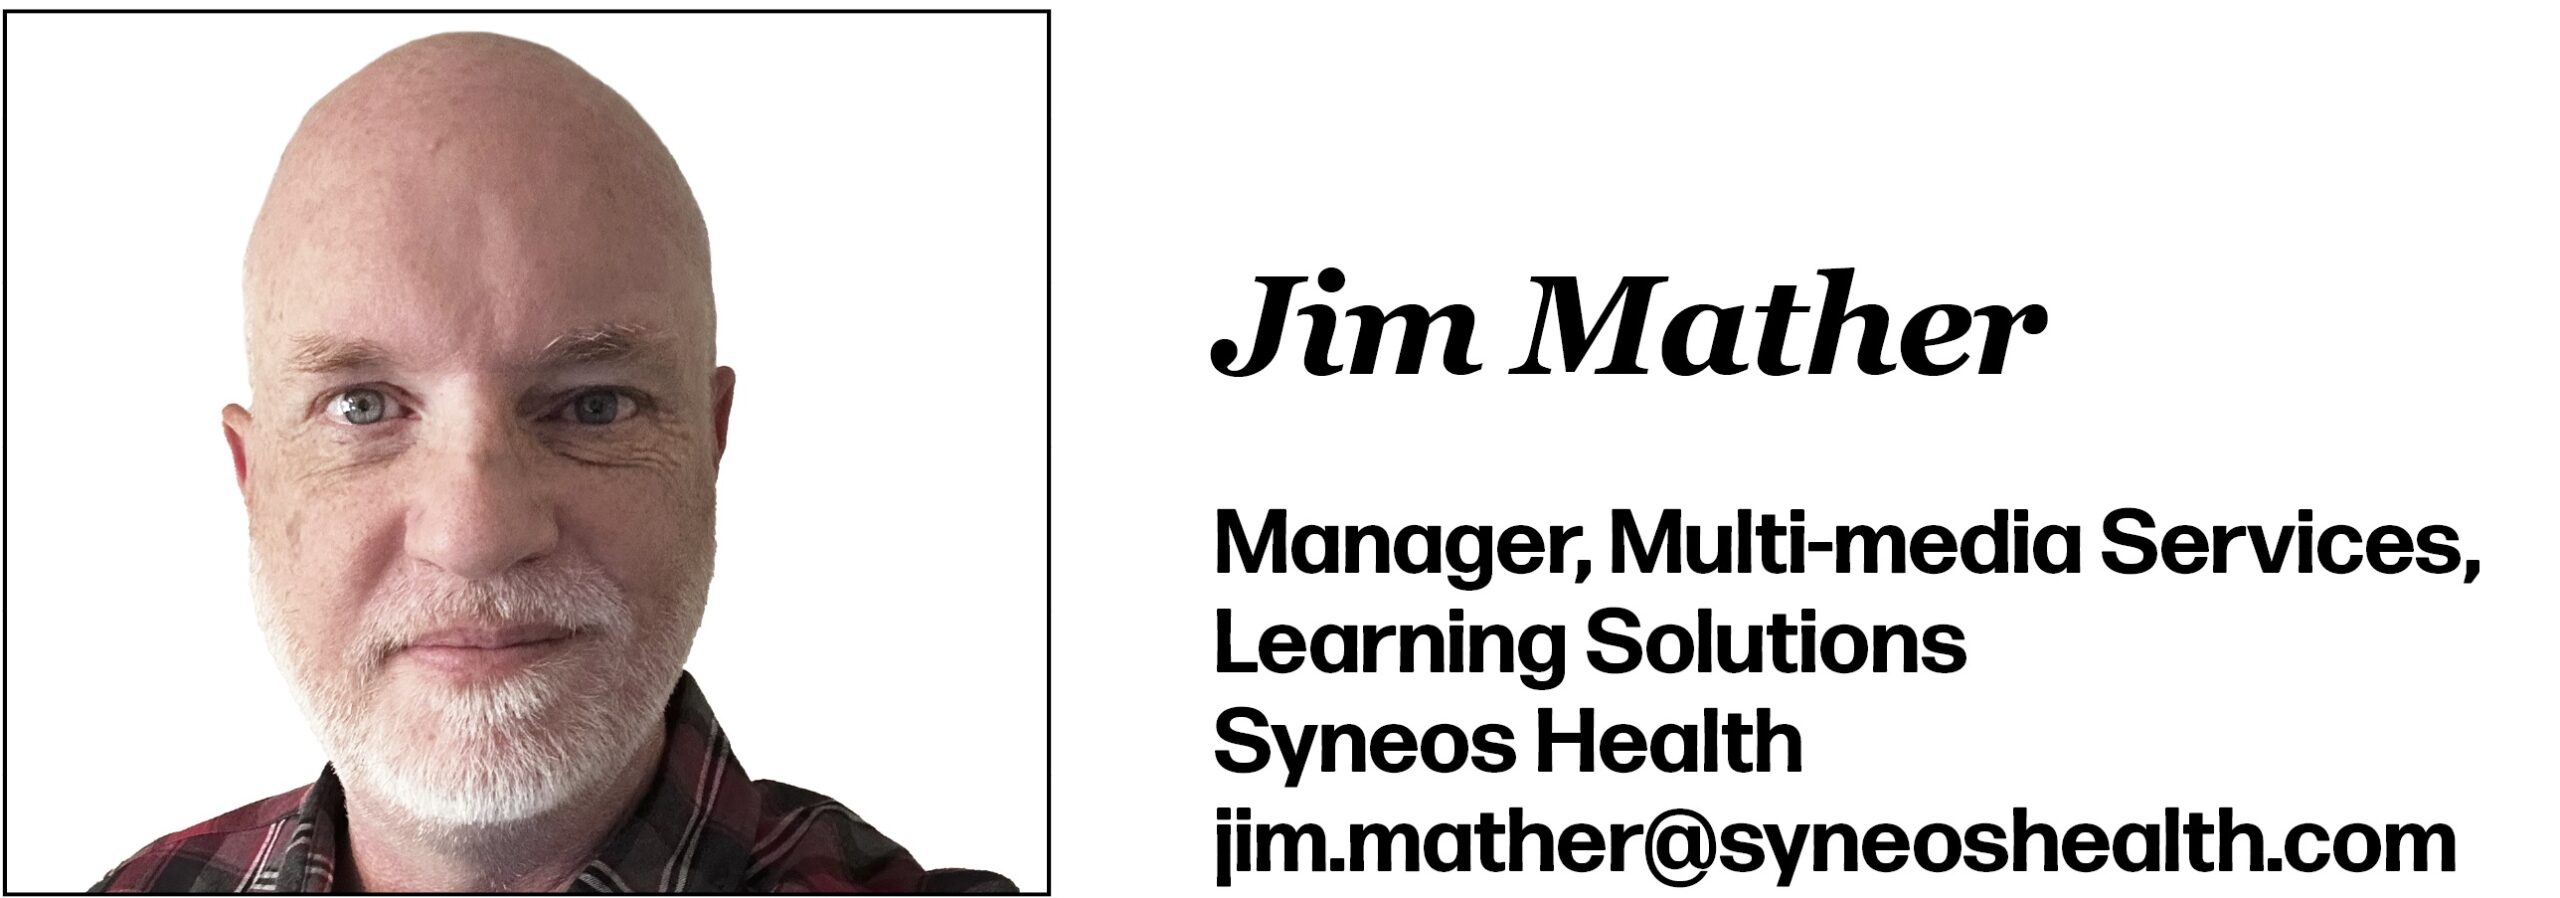 Jim Mather Manager, Multi-media Services, Learning Solutions Syneos Health jim.mather@syneoshealth.com 